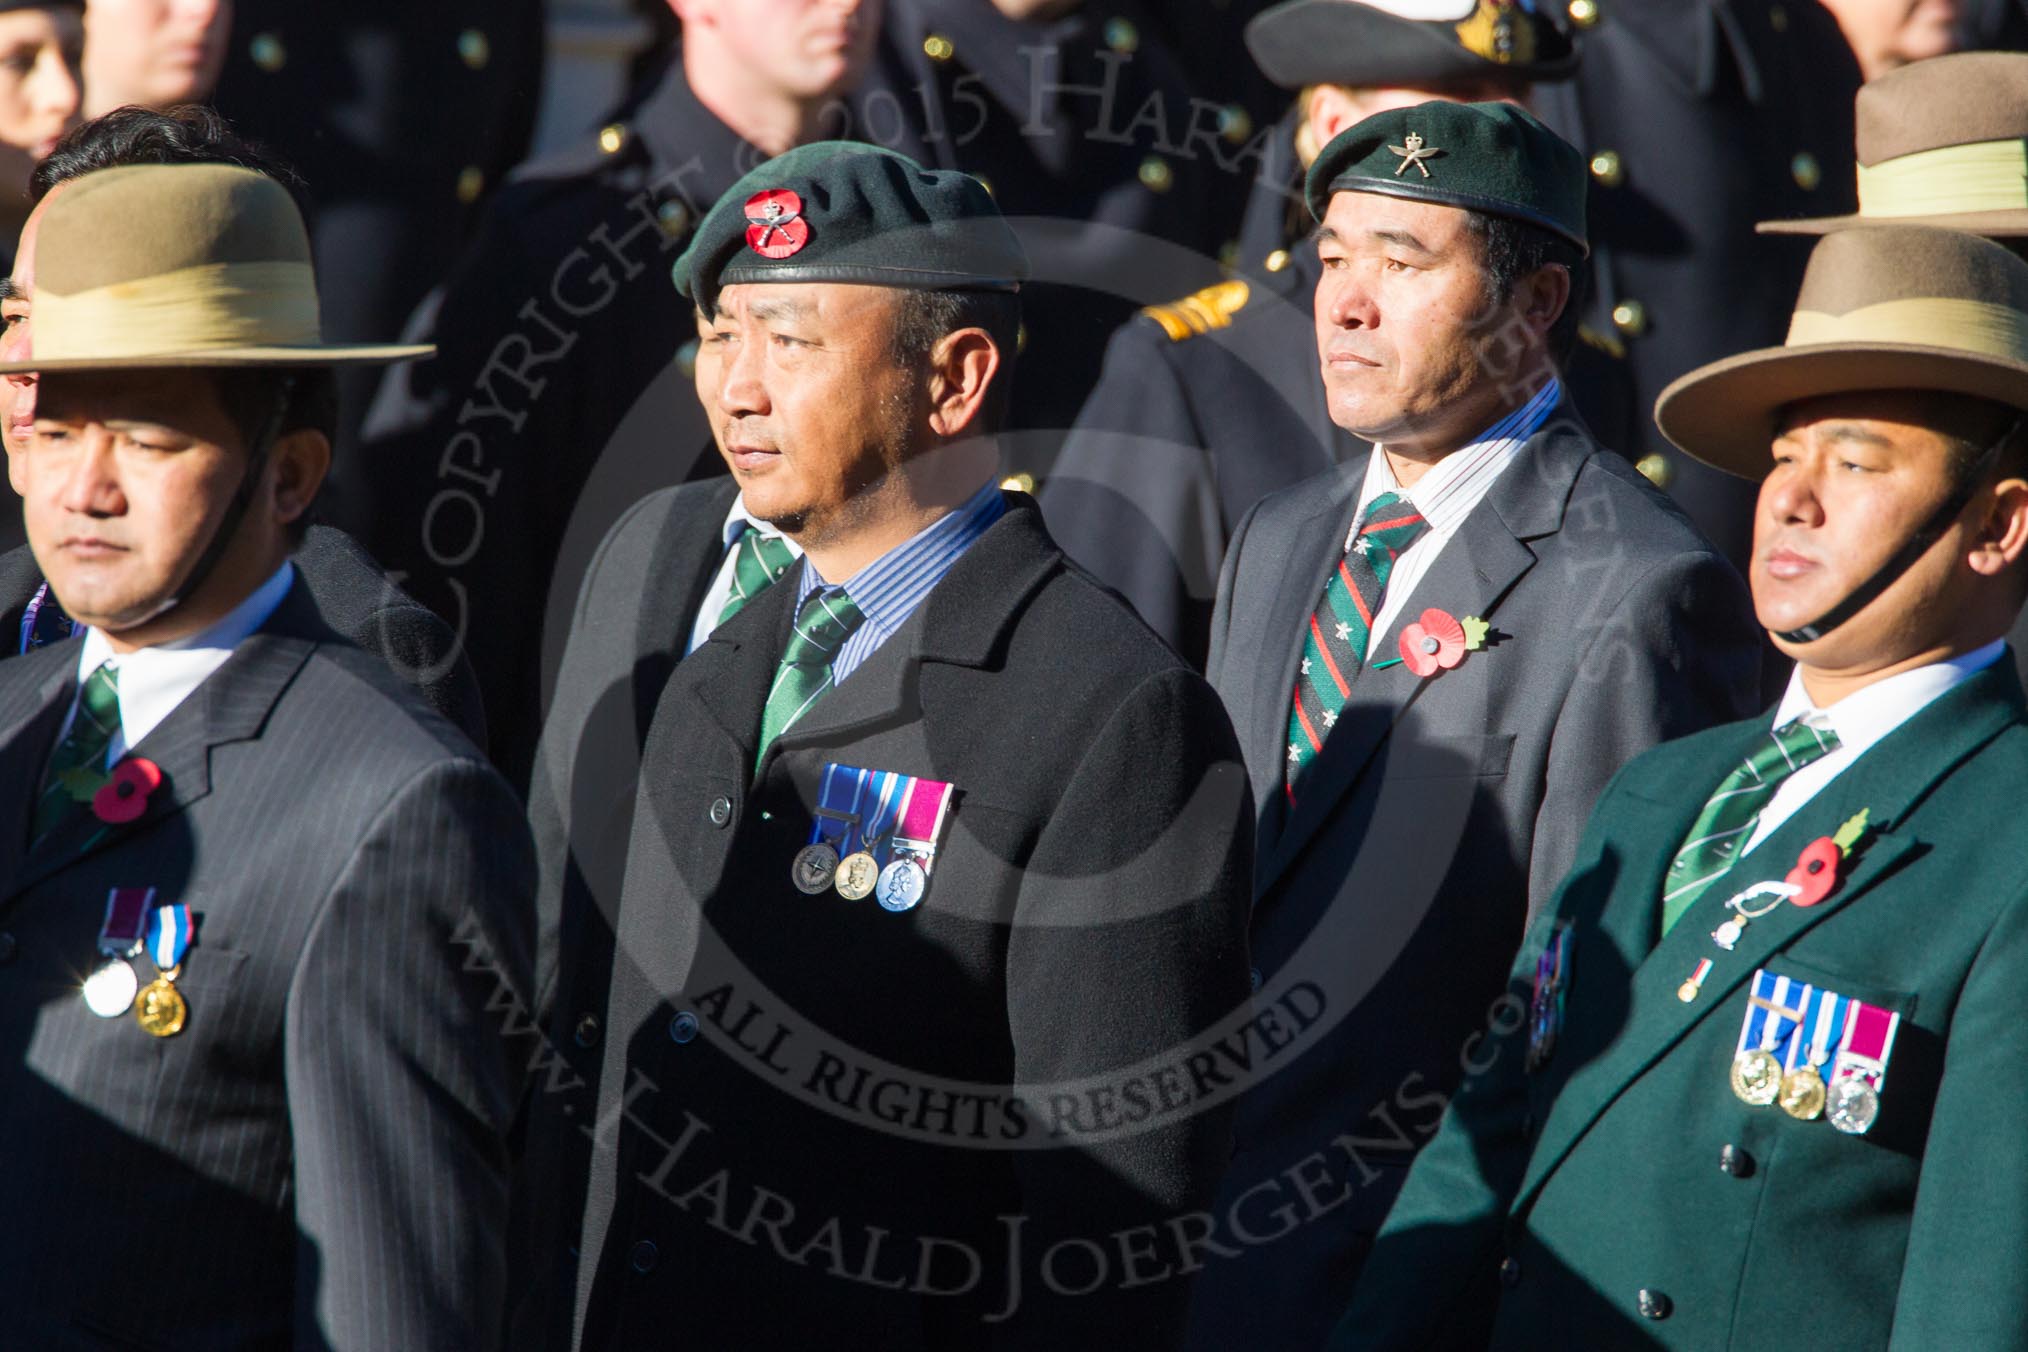 Remembrance Sunday Cenotaph March Past 2013: D2 - British Gurkha Welfare Association..
Press stand opposite the Foreign Office building, Whitehall, London SW1,
London,
Greater London,
United Kingdom,
on 10 November 2013 at 11:38, image #40